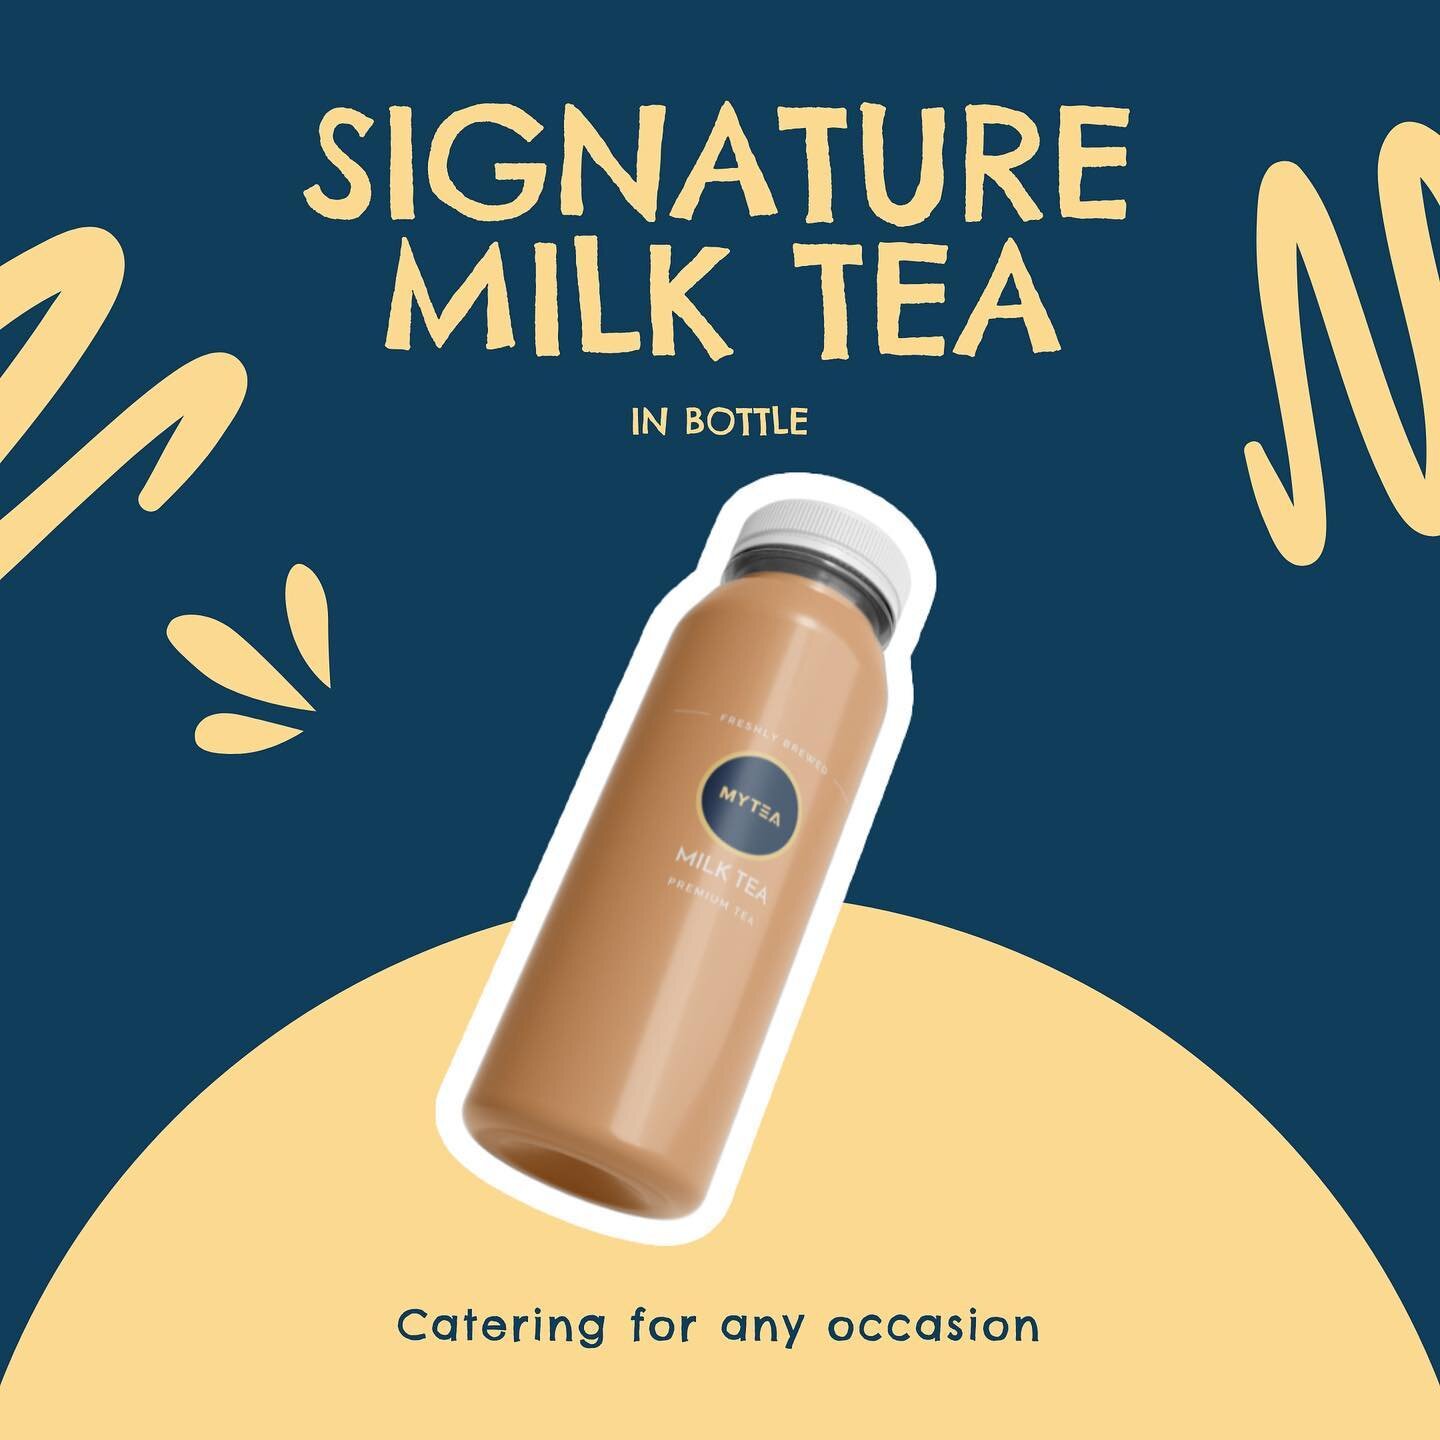 MyTea signature milk tea🧋is our most popular item on our menu. 🔵🟡

And this summer you can enjoy the milk tea with you in our Mytea bottle!⛱️☀️

Contact us for details!✉️

#catering #food #foodie #foodporn #wedding #cateringservice #instafood #eve